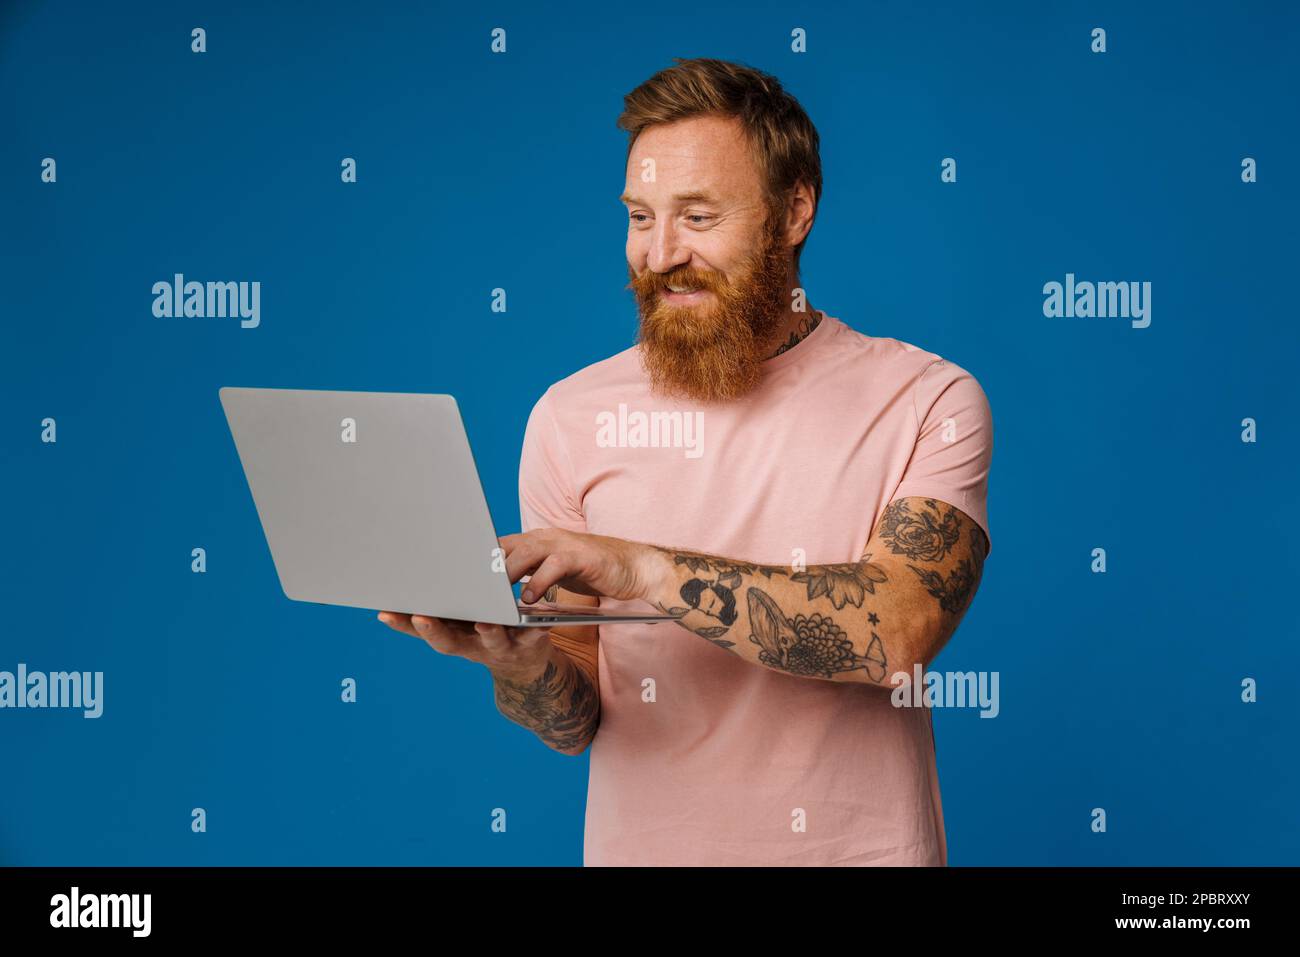 Bearded happy man holding laptop while standing isolated over blue background Stock Photo